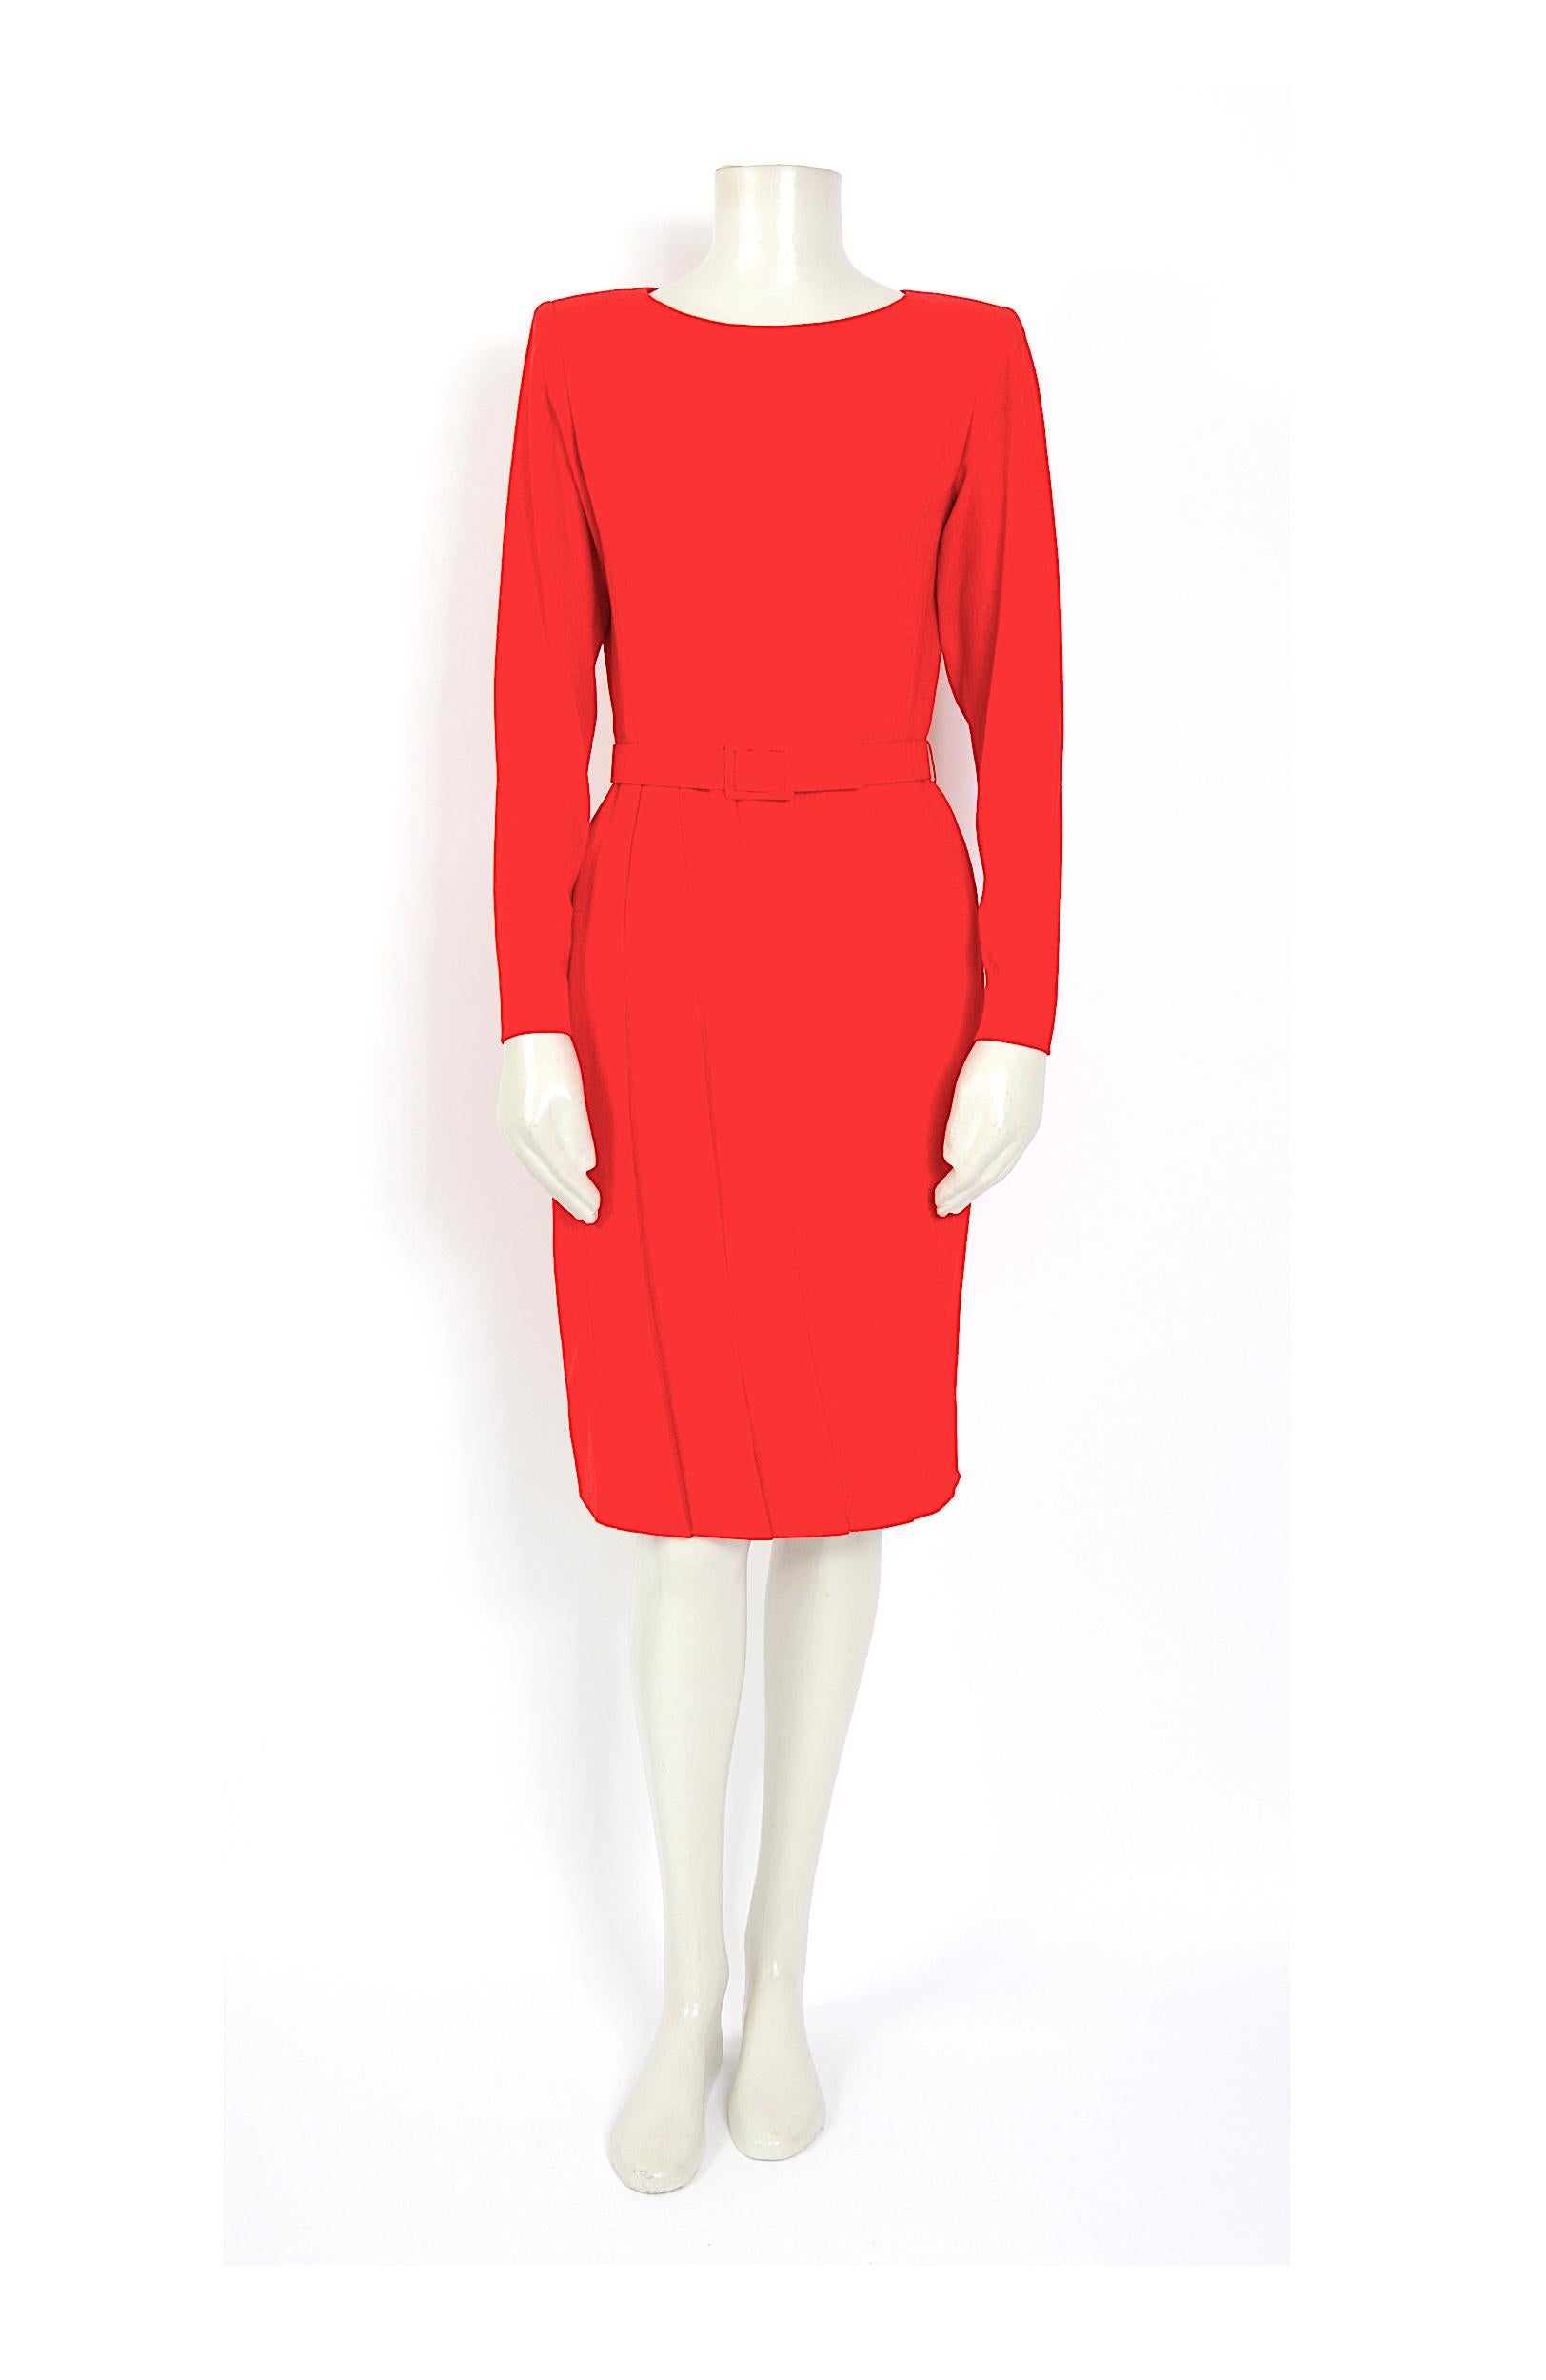 Lovely pleated skirt coral red crepe dress by Lanvin comes with a matching belt.
Made in a mix of 10%wool - 45%cupro - 30%acetate - 
The dress is fully lined with a 100% silk material
Made in France  - 
French size 36 but also works well on a French